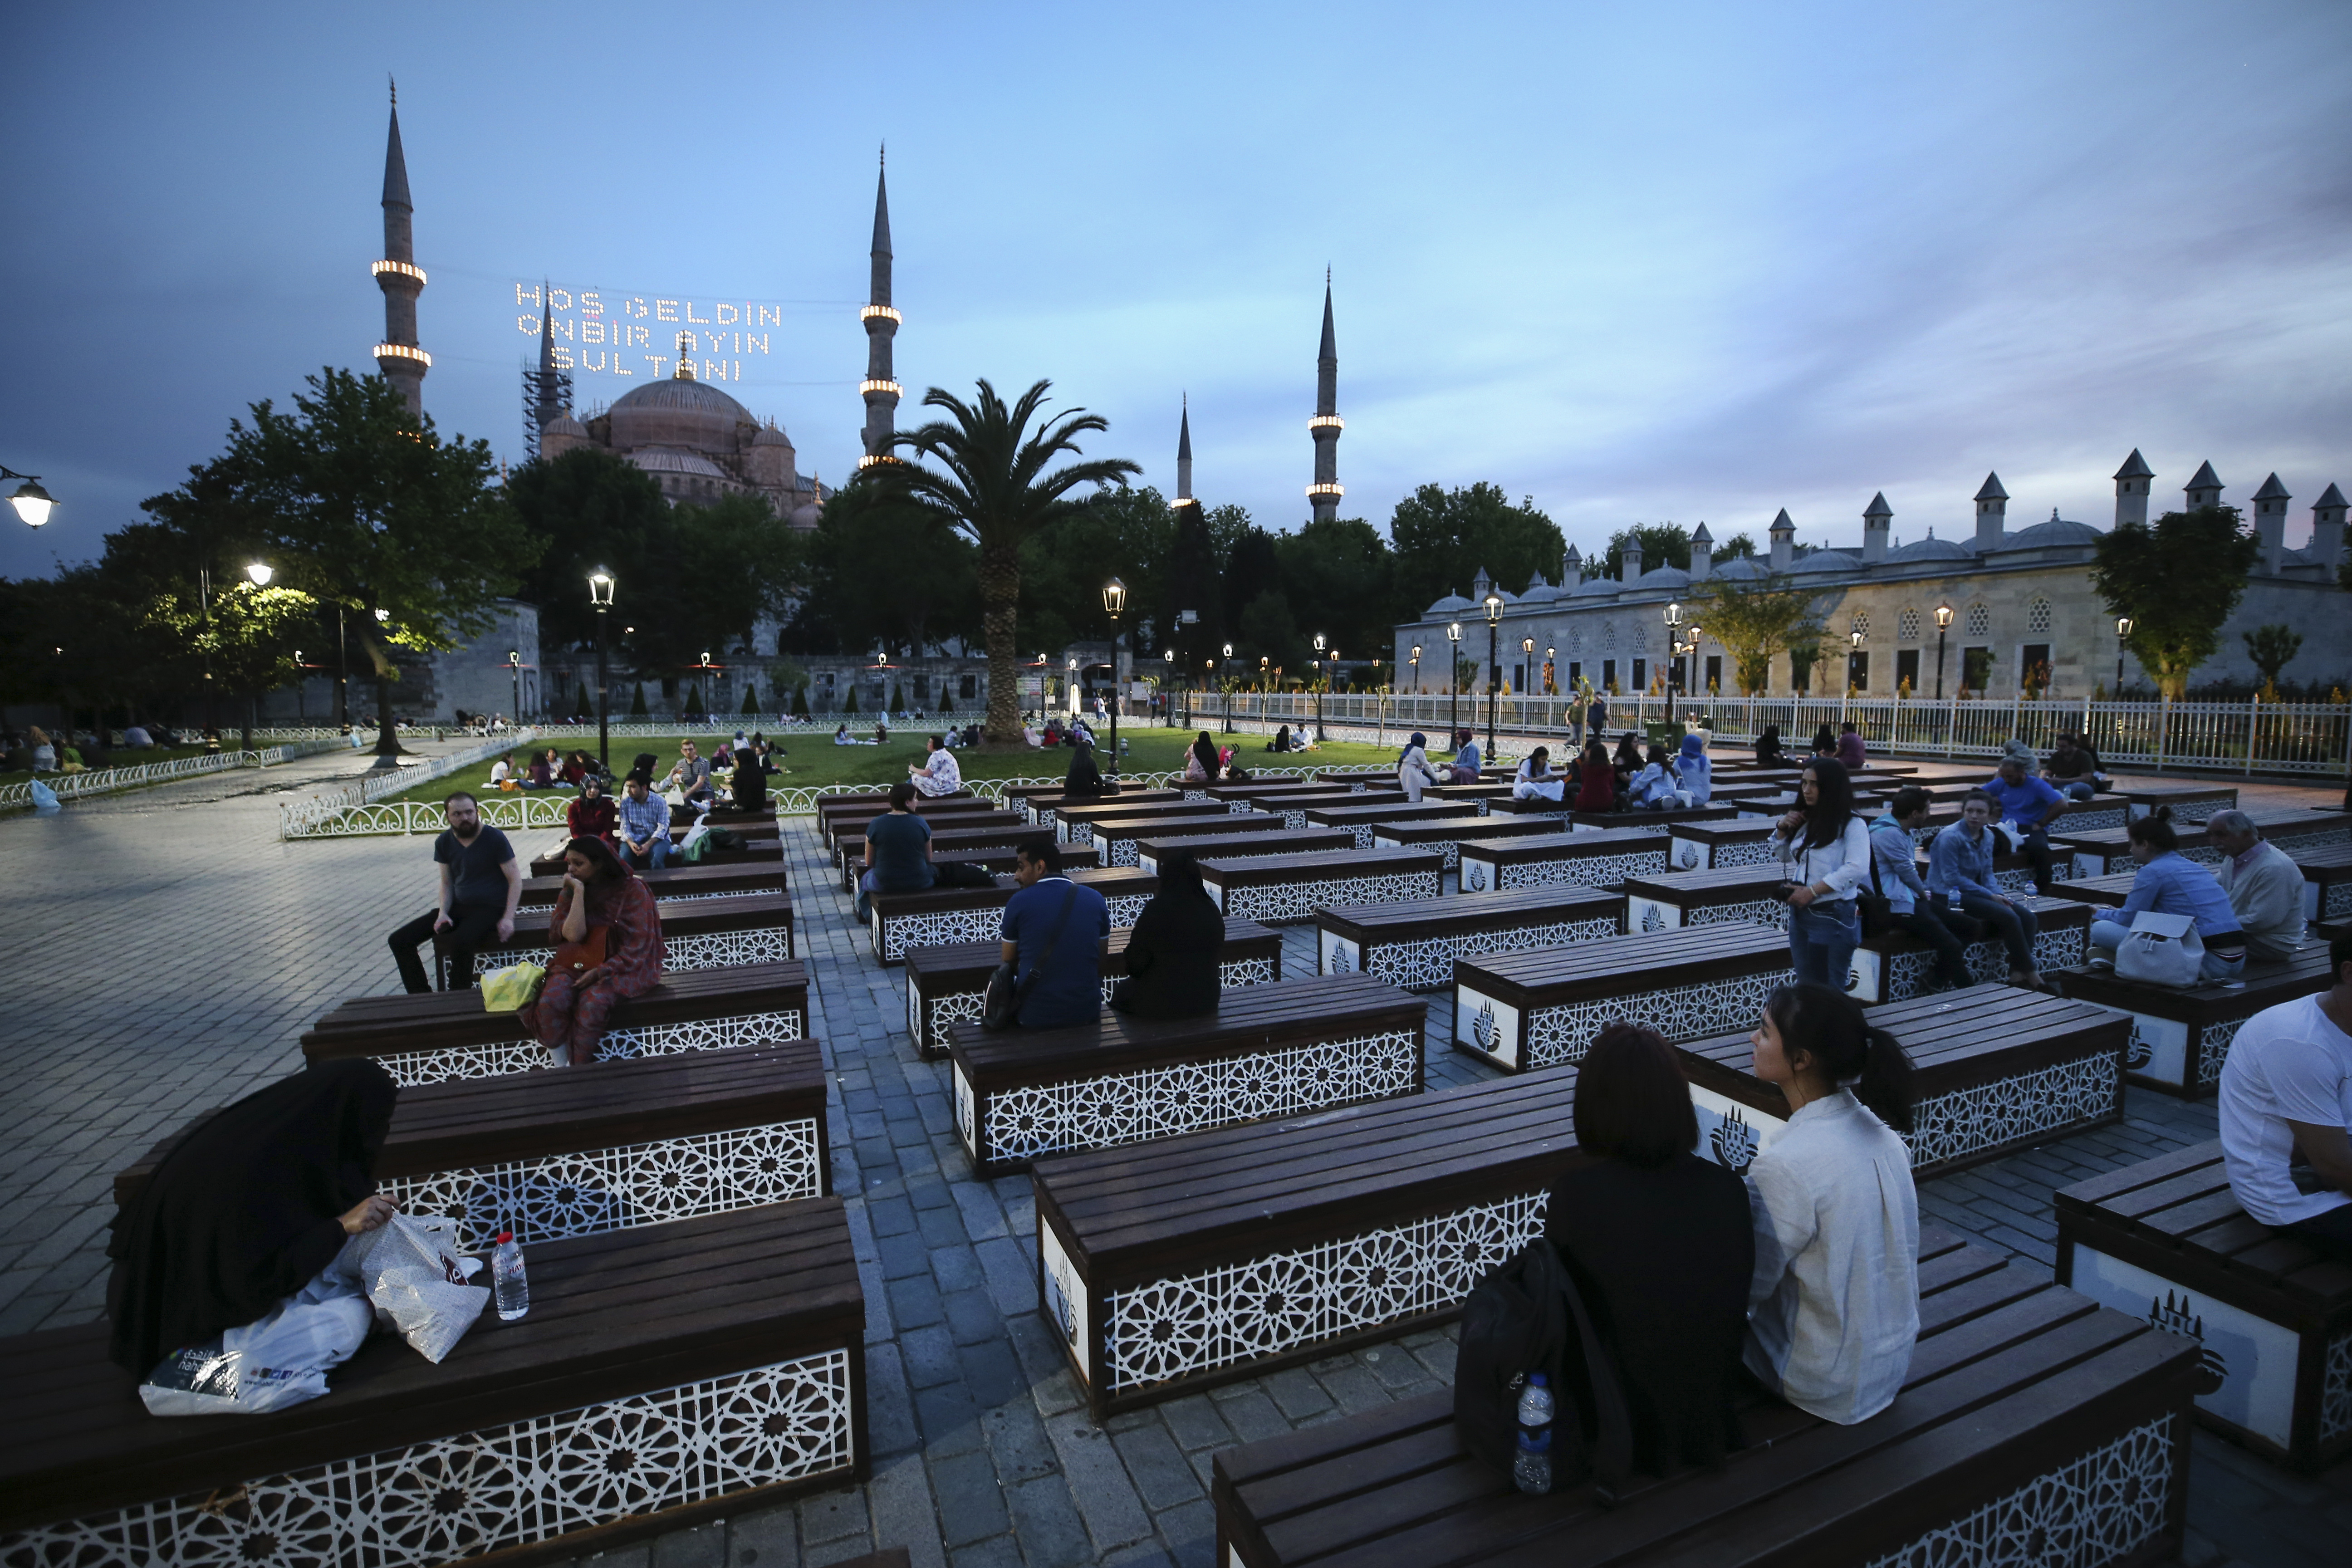 Backdropped by the iconic Sultan Ahmed Mosque, better known as the Blue Mosque, people break their fast in the historic Sultanahmet district of Istanbul, Saturday, May 27, 2017 on the first day of the fasting month of Ramadan. The lights read in Turkish: 'Welcome, the Sultan of 11 months'. Muslims throughout the world are marking Ramadan - a month of fasting during which the observants abstain from food, drink and other pleasures from sunrise to sunset. After an obligatory sunset prayer, a large feast known as 'iftar' is shared with family and friends. (AP Photo/Emrah Gurel)